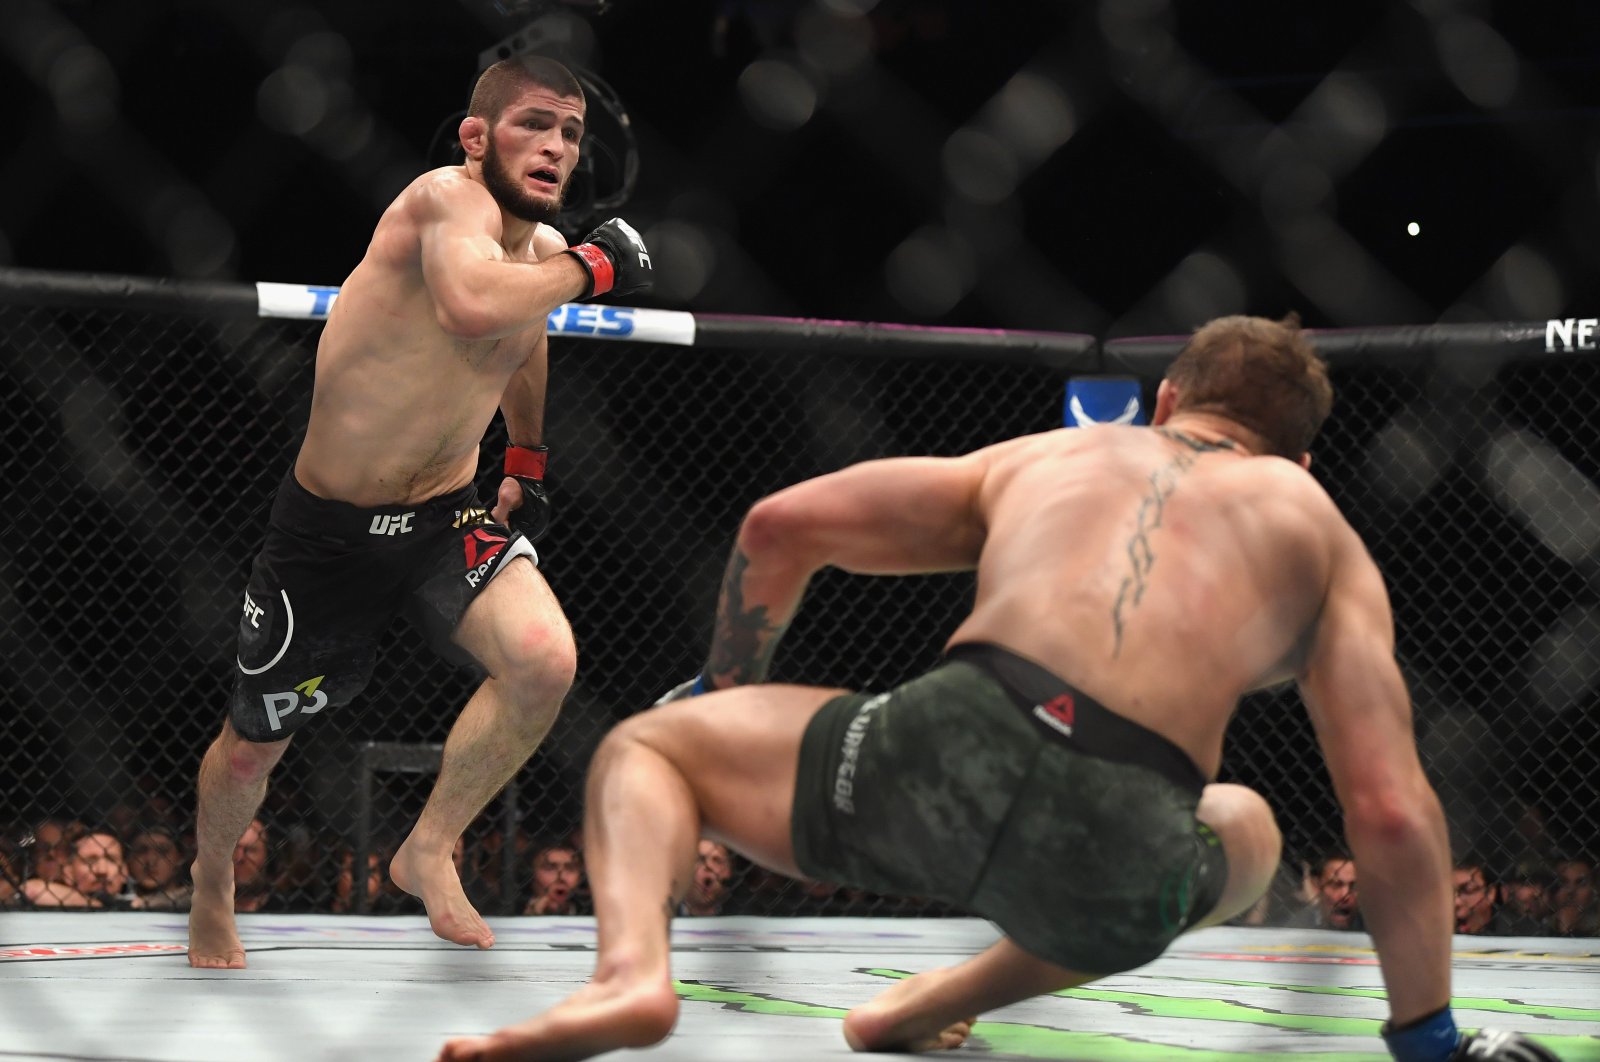 Khabib Nurmagomedov (L) fights Conor McGregor during a lightweight title mixed martial arts bout at UFC 229 in Las Vegas, Oct. 6, 2018. (AFP Photo)